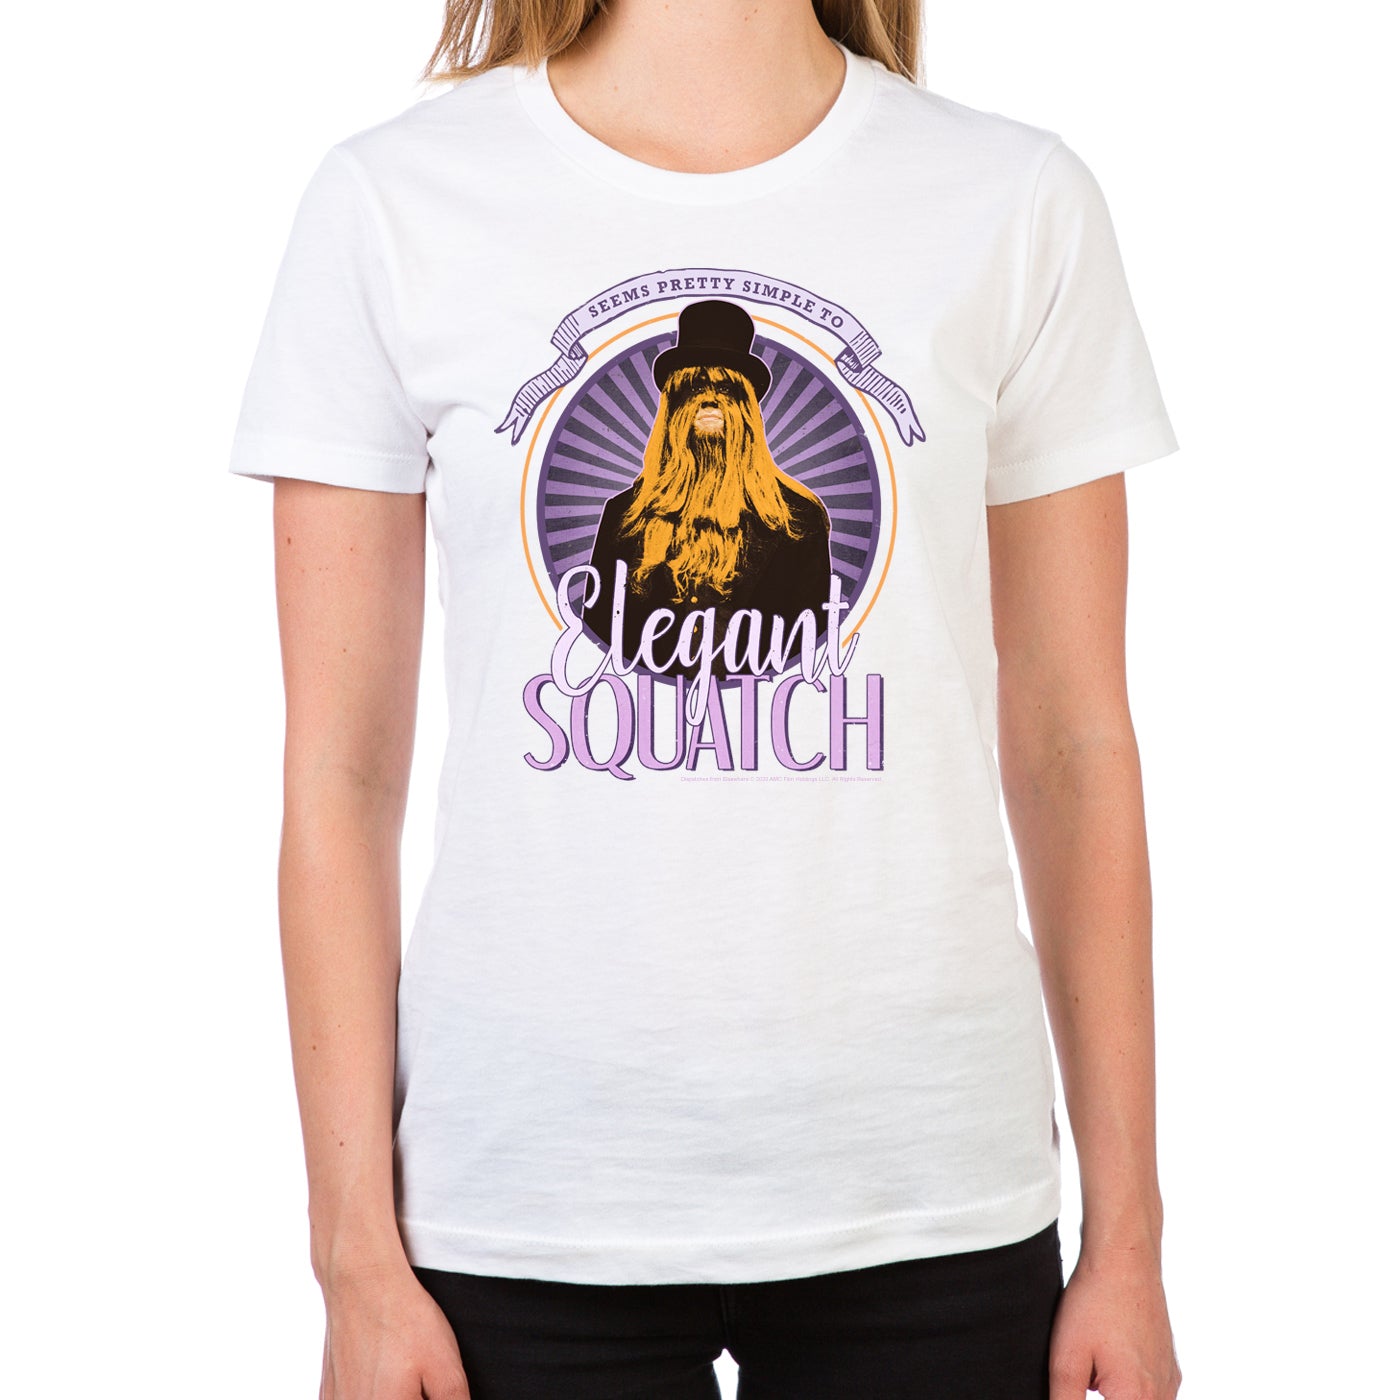 Dispatches From Elsewhere Elegant Squatch Women's T-Shirt